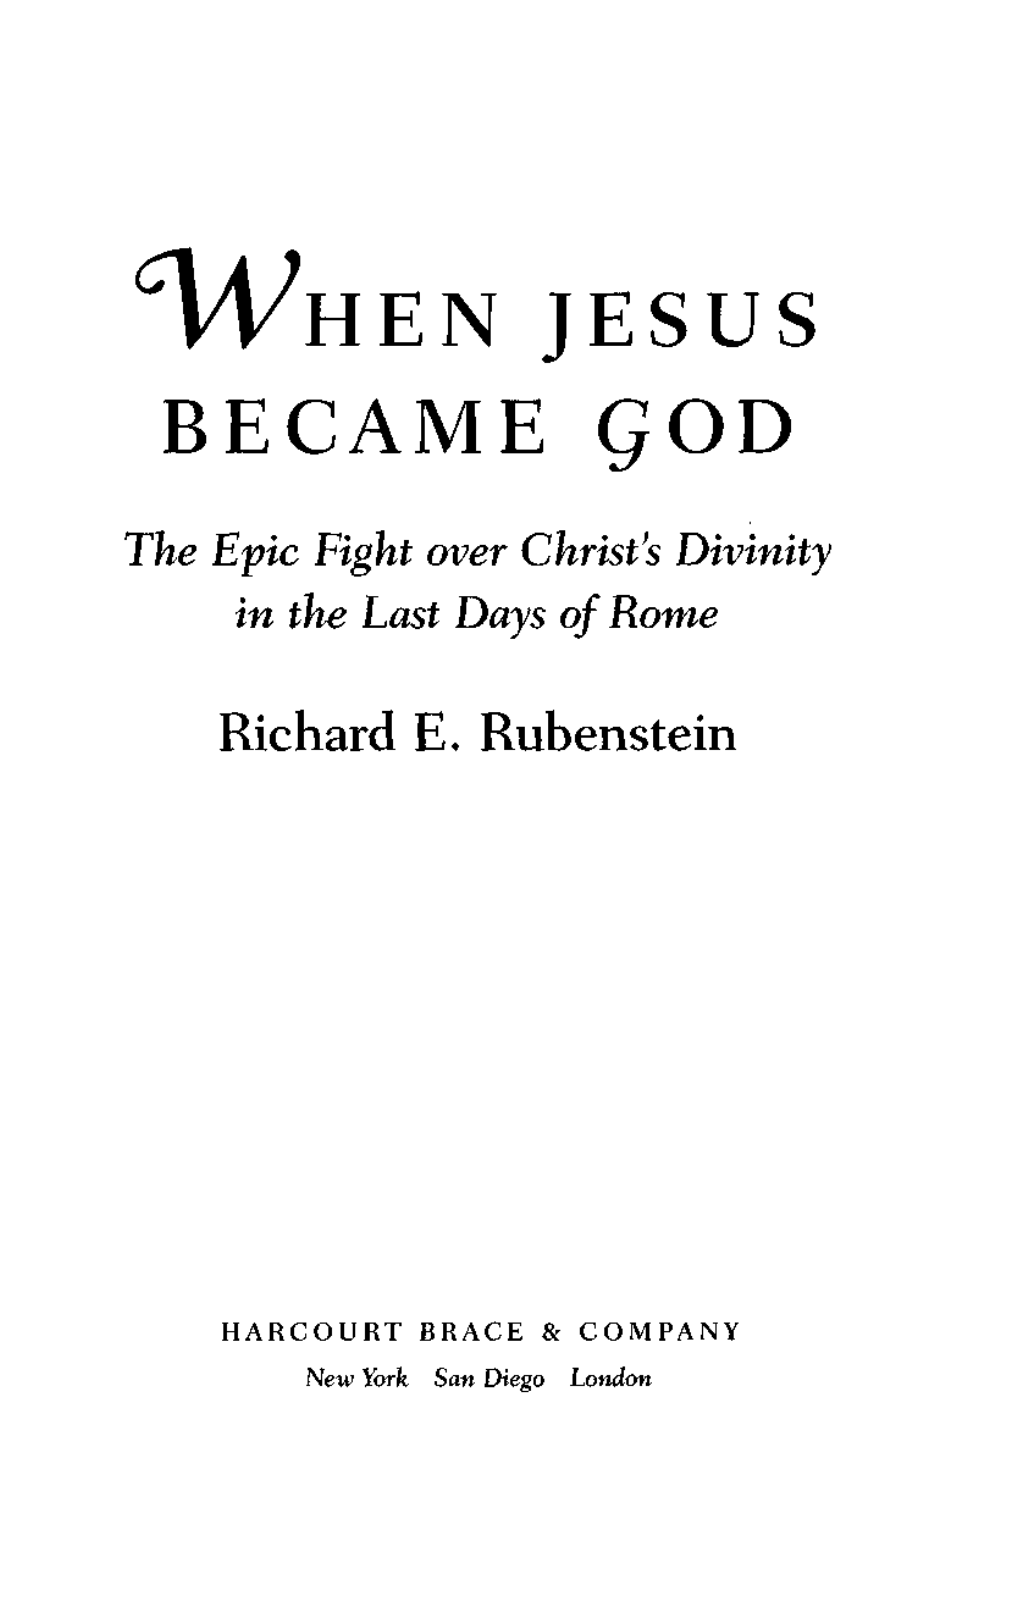 When Jesus Became God : the Epic Struggle Over Christ's Divinity in the Last Days of Rome / by Richard E